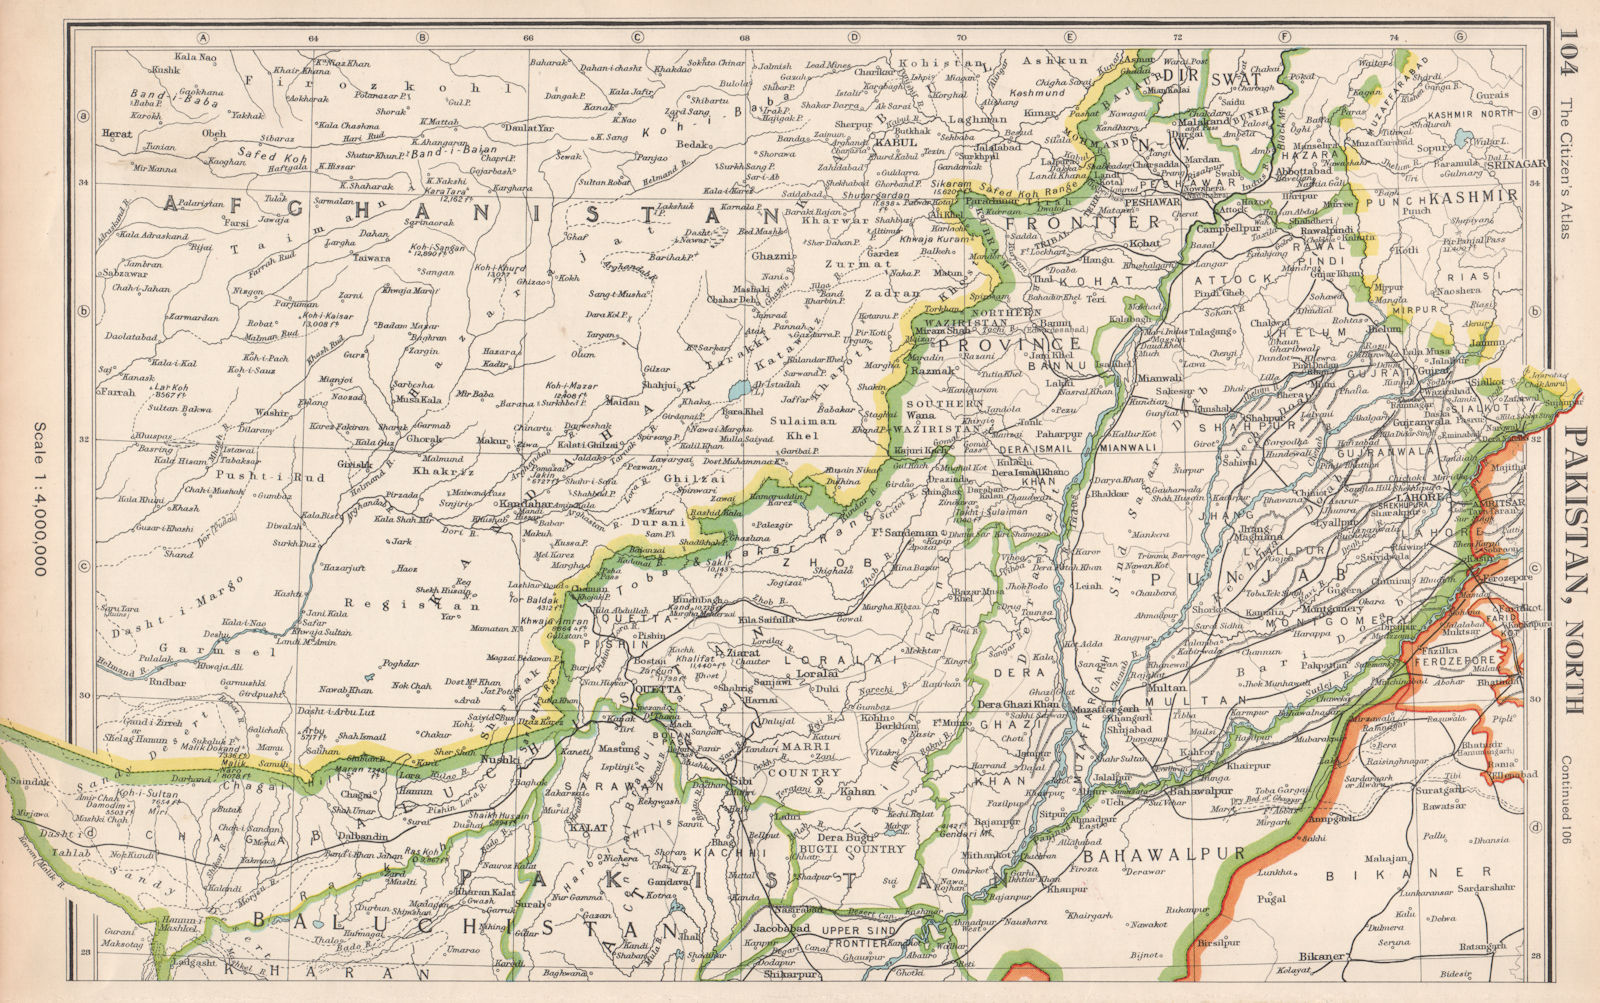 PAKISTAN NORTH. Showing unresolved border with independent Kashmir 1952 map